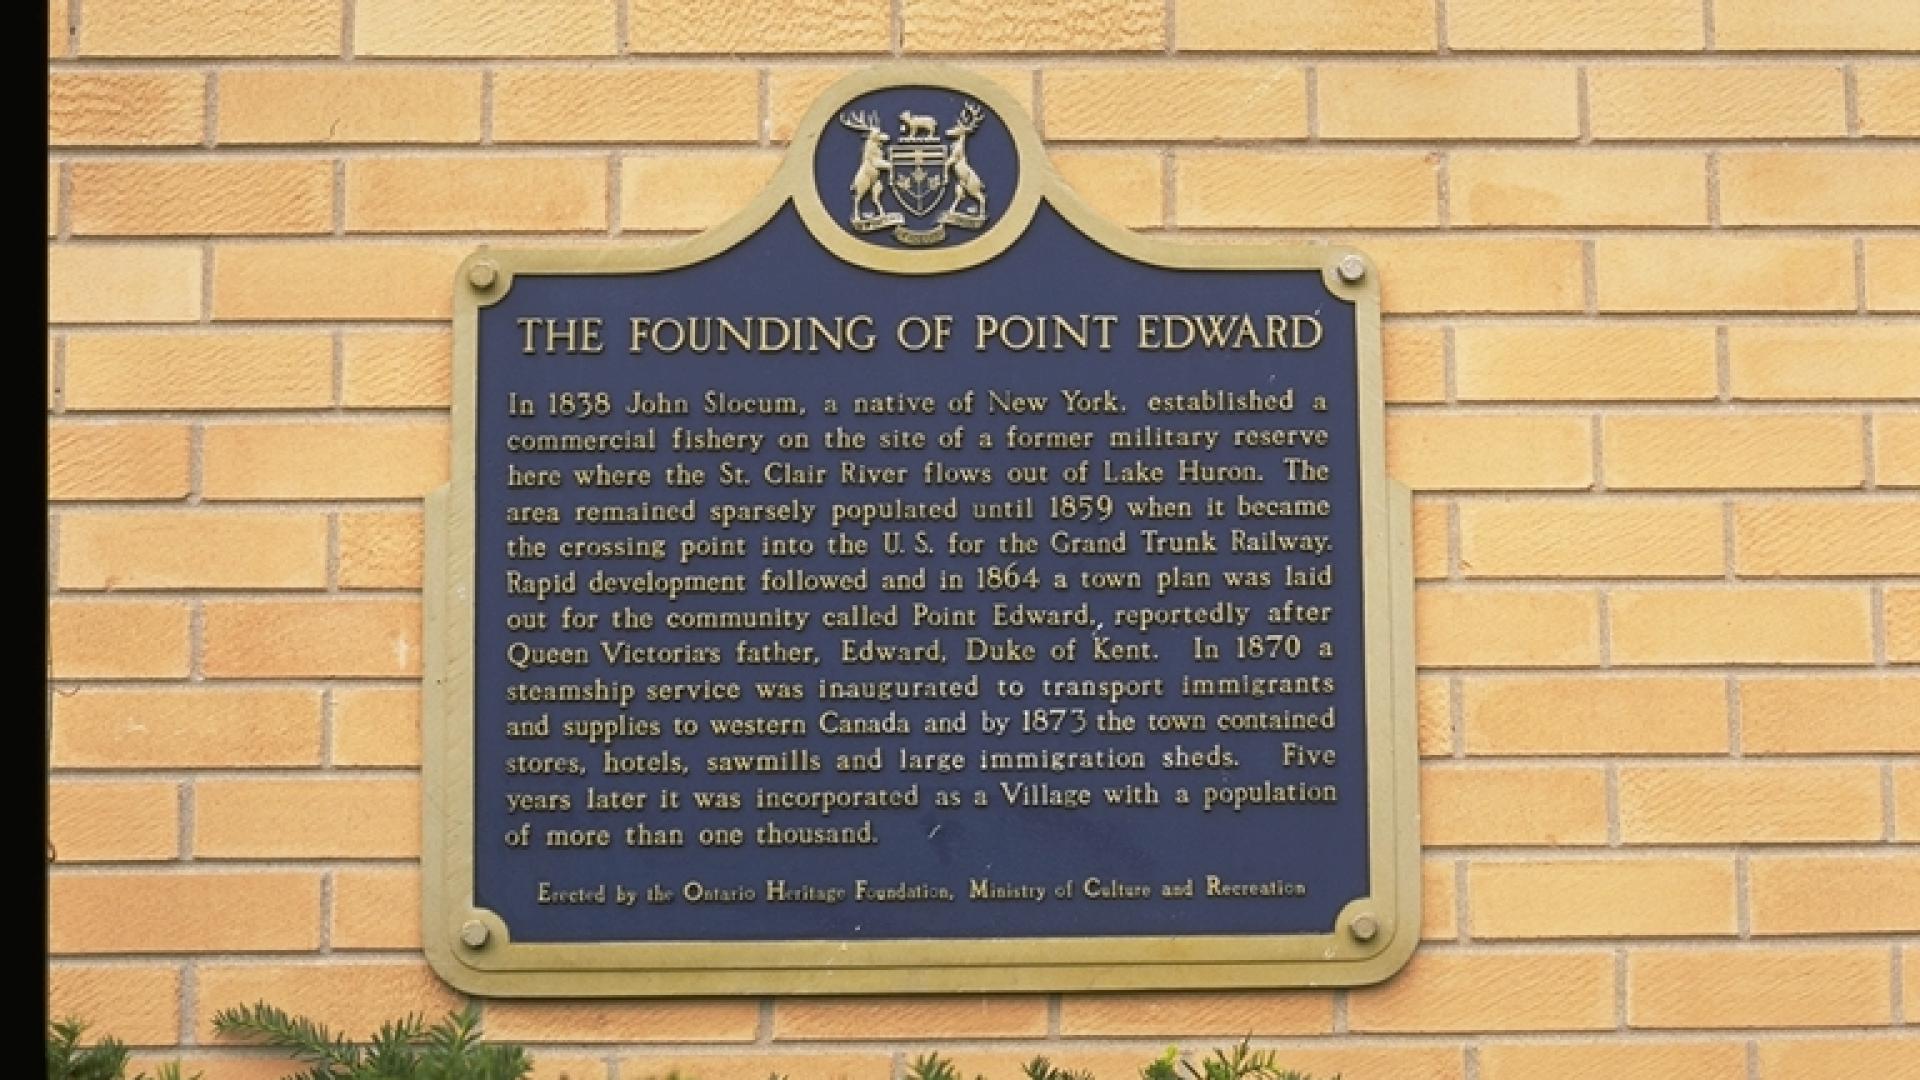 Plaque with information on the founding of Point Edward.